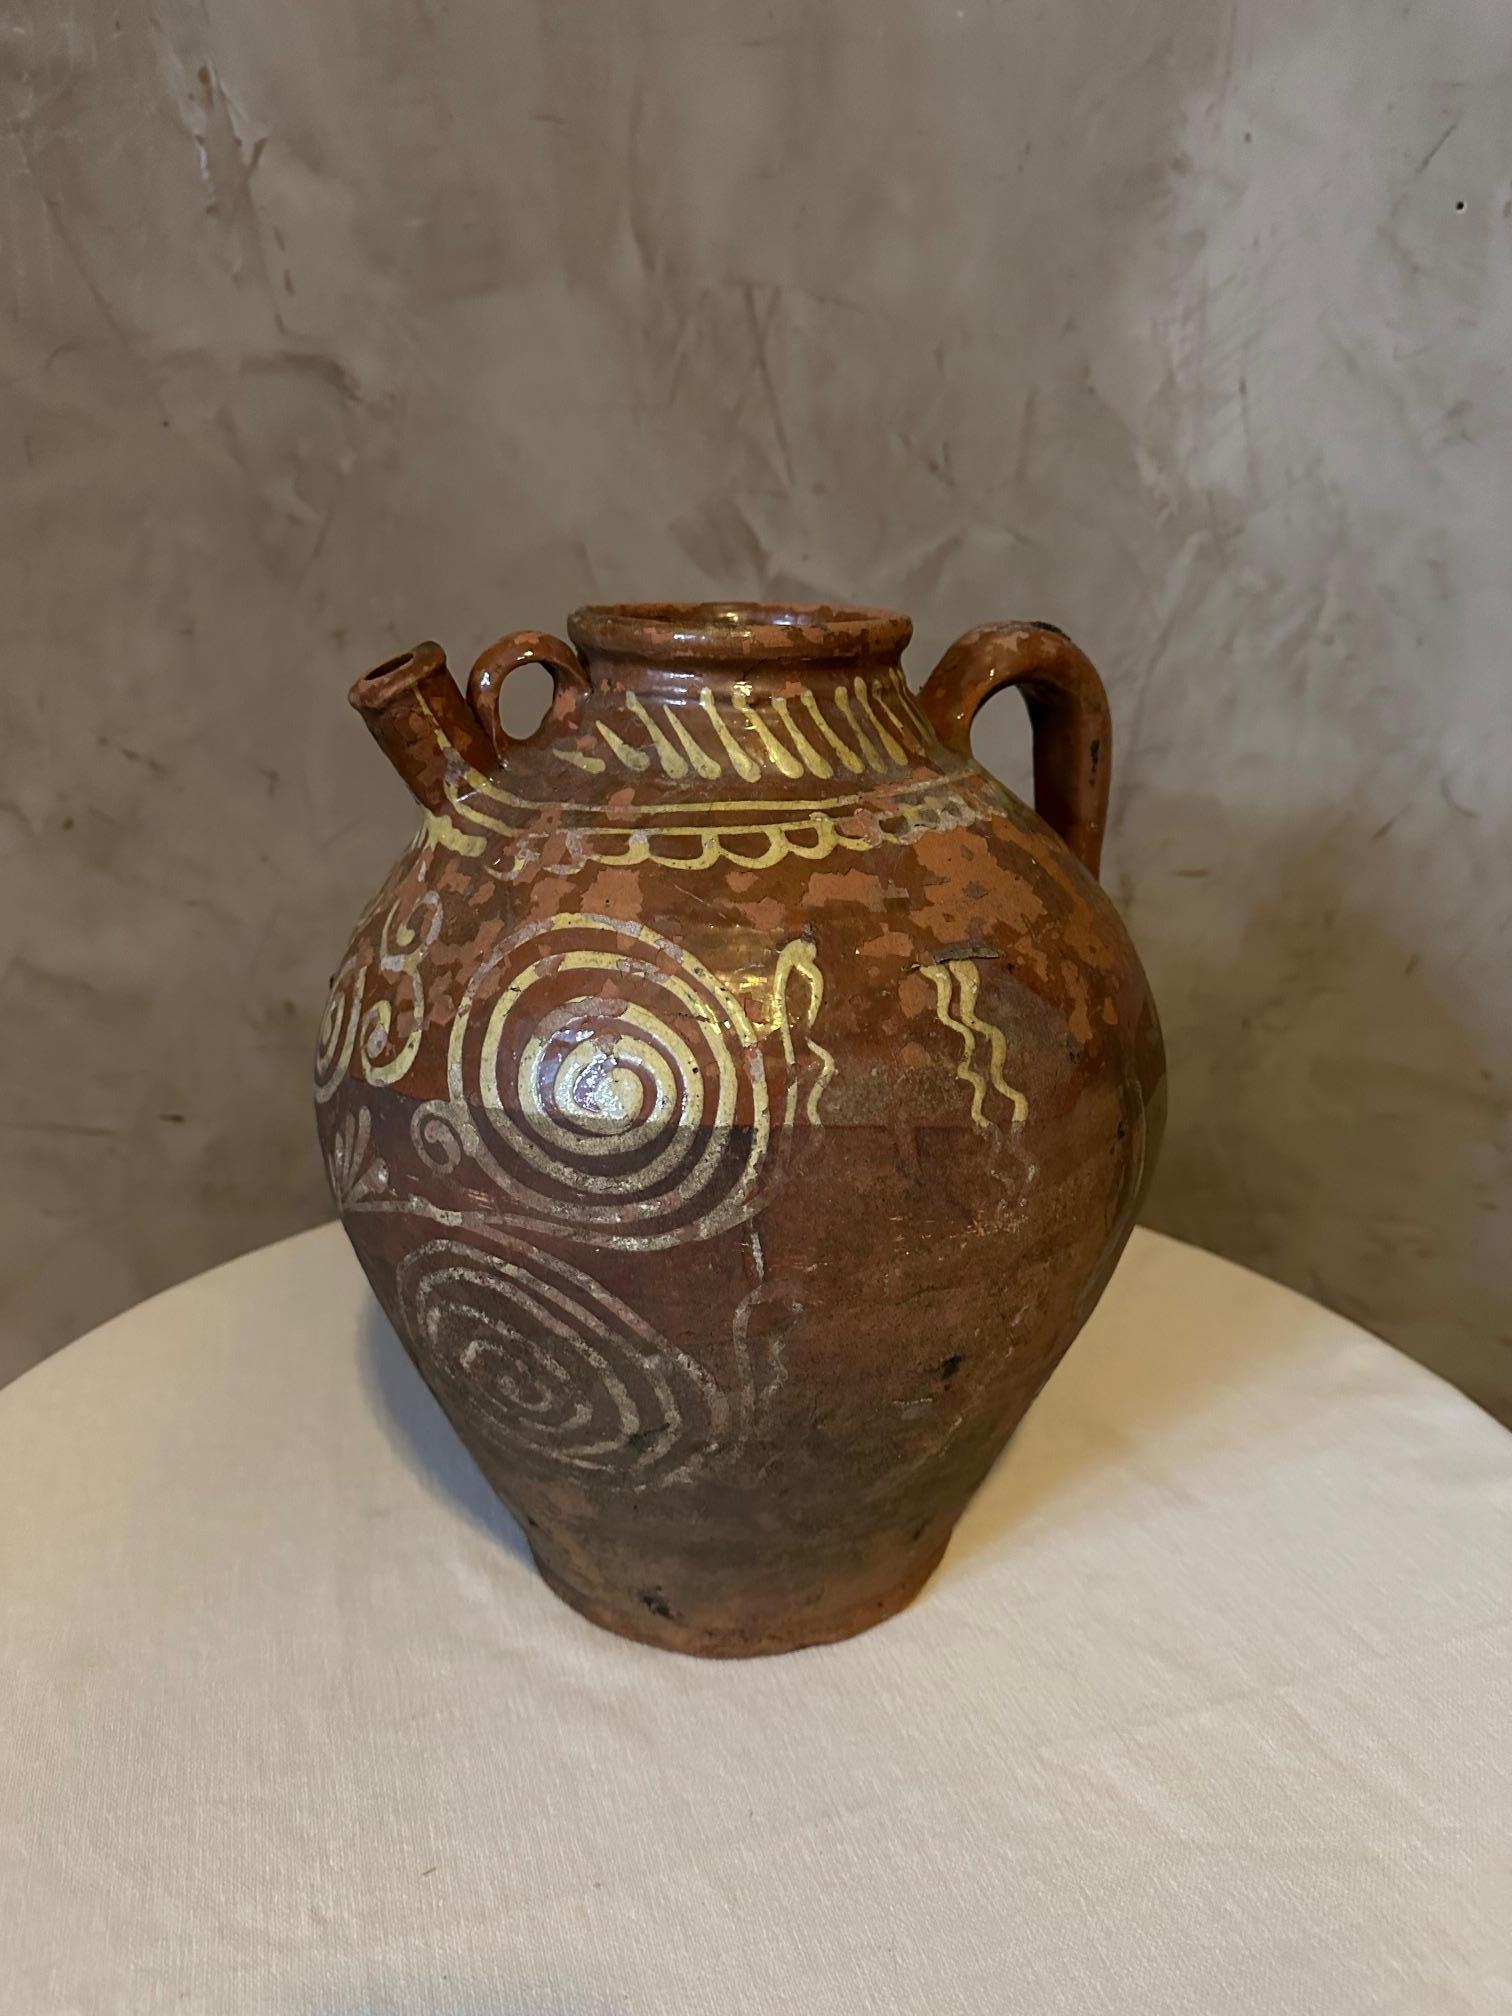 Very Nice rustic French glazed terracotta oil jug from the 19th century, with wavy lines and nicely distressed appearance. 
Created in France during the 19th century, this glazed terracotta pottery piece features a brown circular body accented with